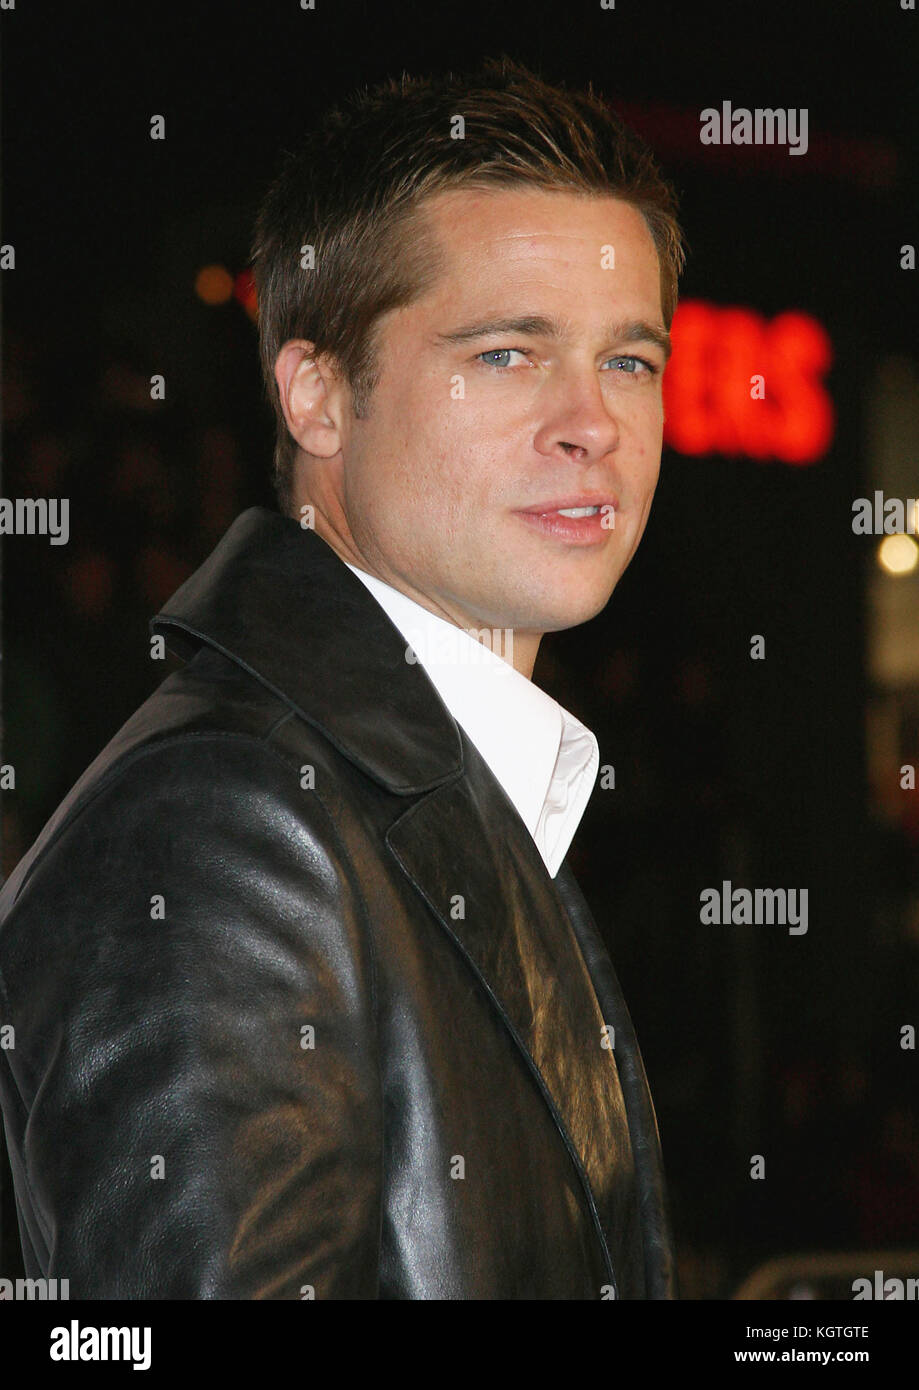 Brad Pitt arriving at the 'Ocean's 12' Premiere held at Grauman's Chinese Theatre in Los Angeles on Wednesday, December 8, 2004.Brad Pitt -  = People,  Three quarters, Premiere, Awards show,  Arrival, Red Carpet Event, Vertical, Smiling, Film Industry,  USA, Movie actor, movie celebrity, Artist, Celebrity, Looking At Camera, Photography, Arts Culture and Entertainment,  Attending an event,  Bestof, One Person, Stock Photo